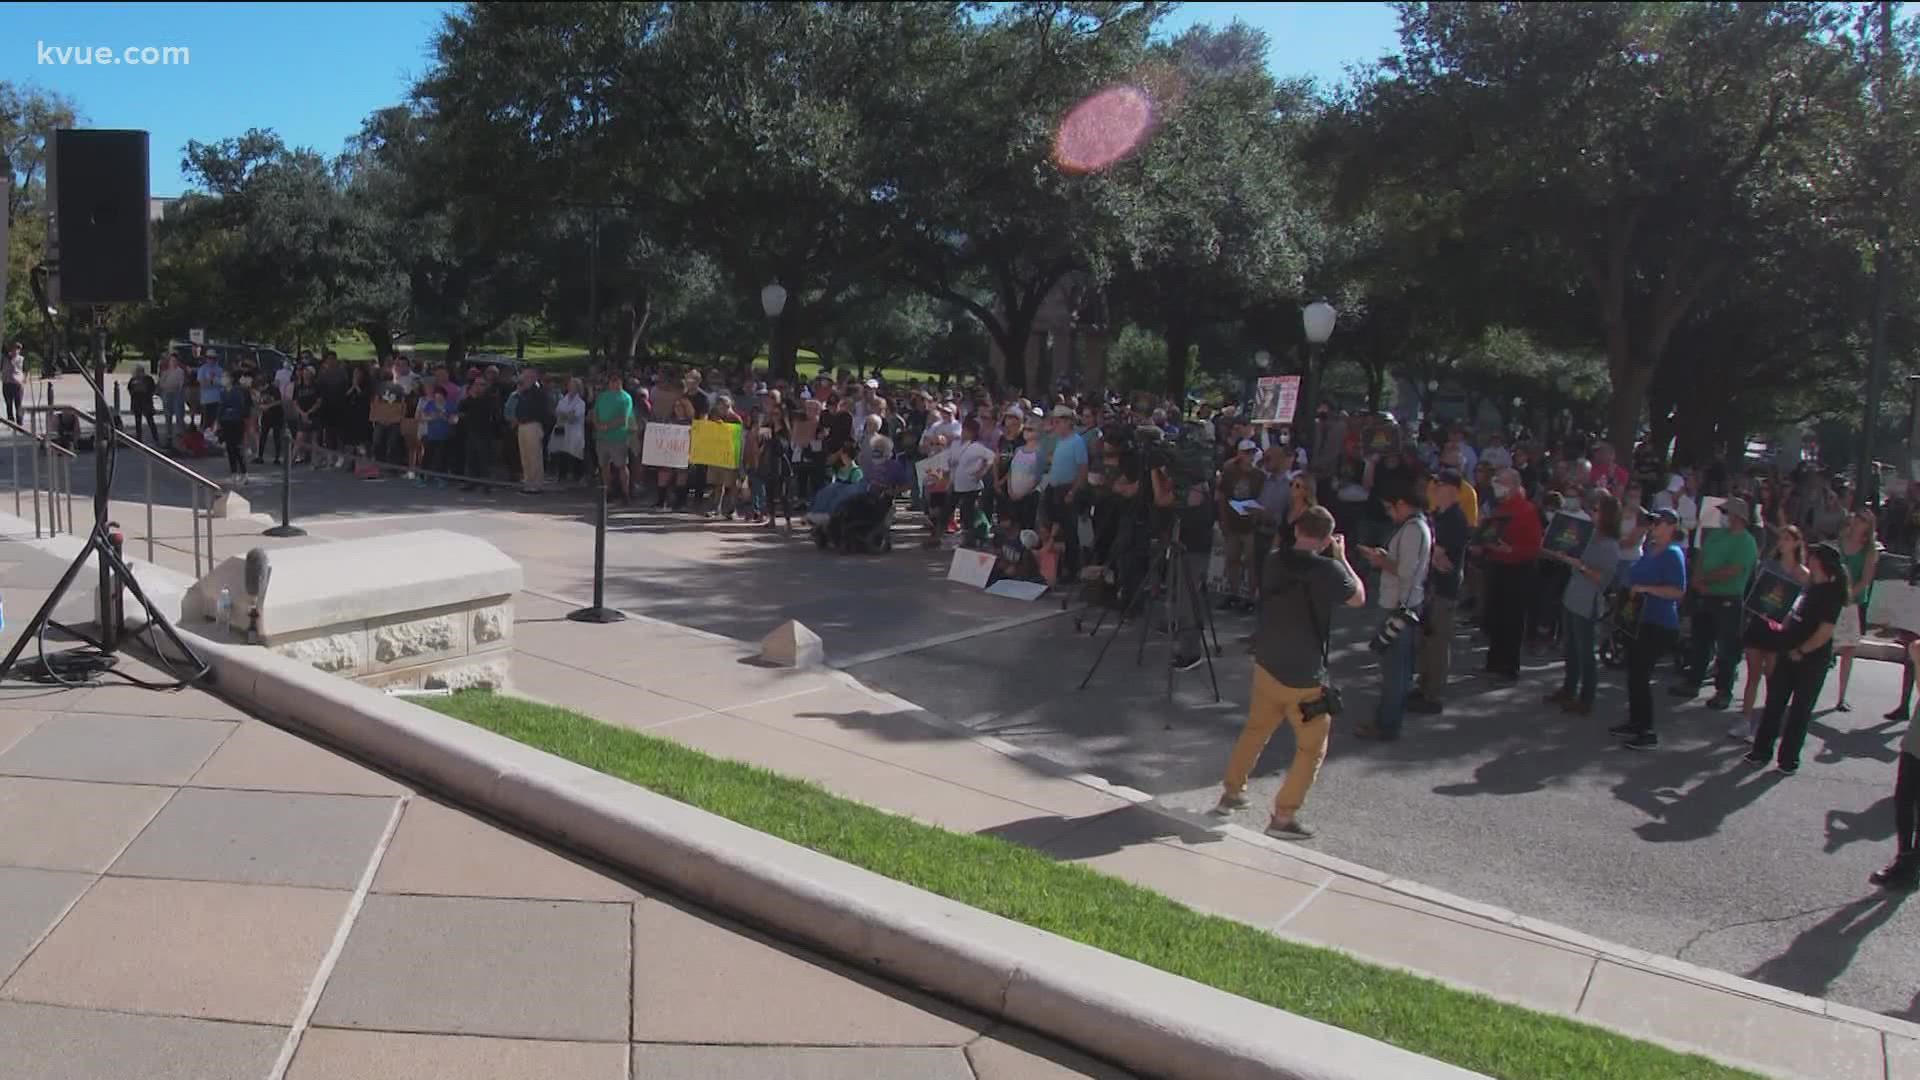 The rally was in response to a recent spike in anti-Semitism, racism and hate speech in Austin.